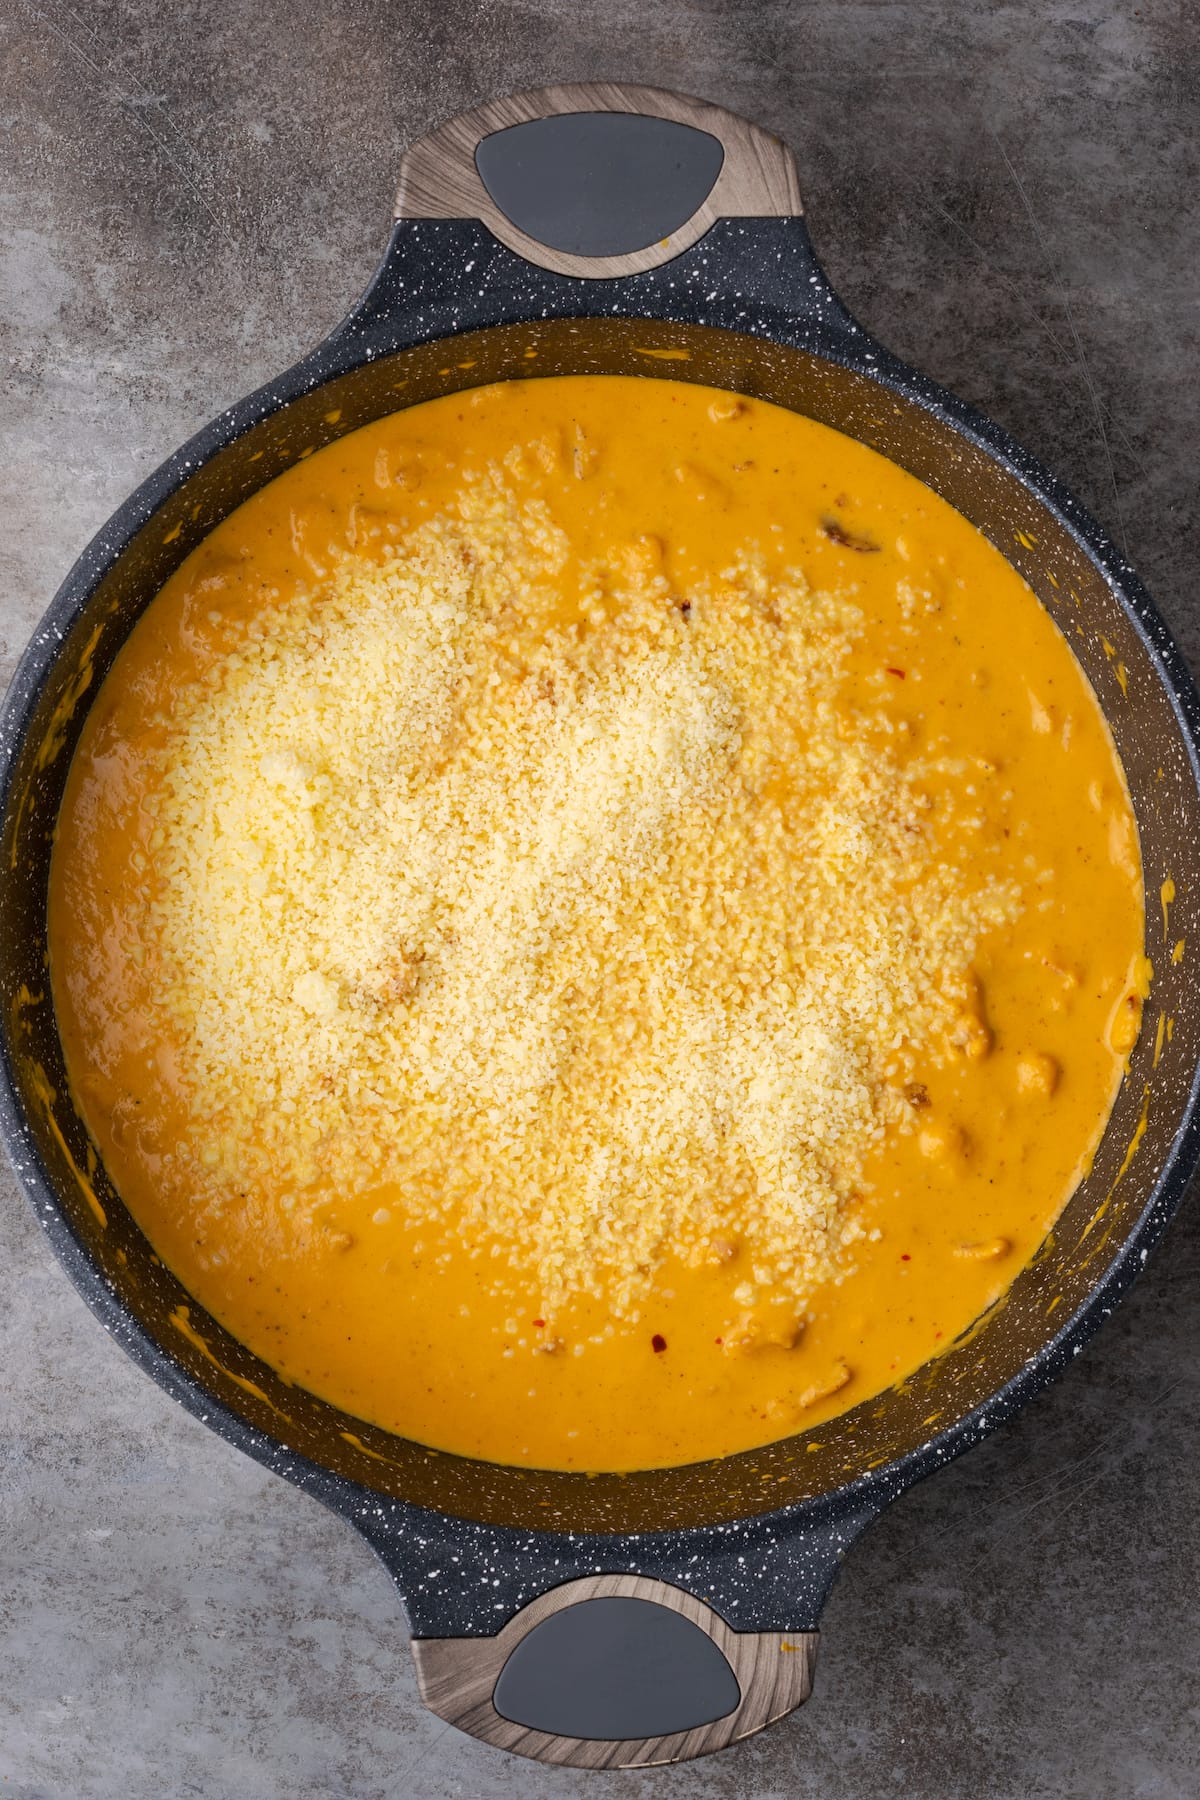 Parmesan cheese is added to the pumpkin cream sauce in a cast iron skillet.